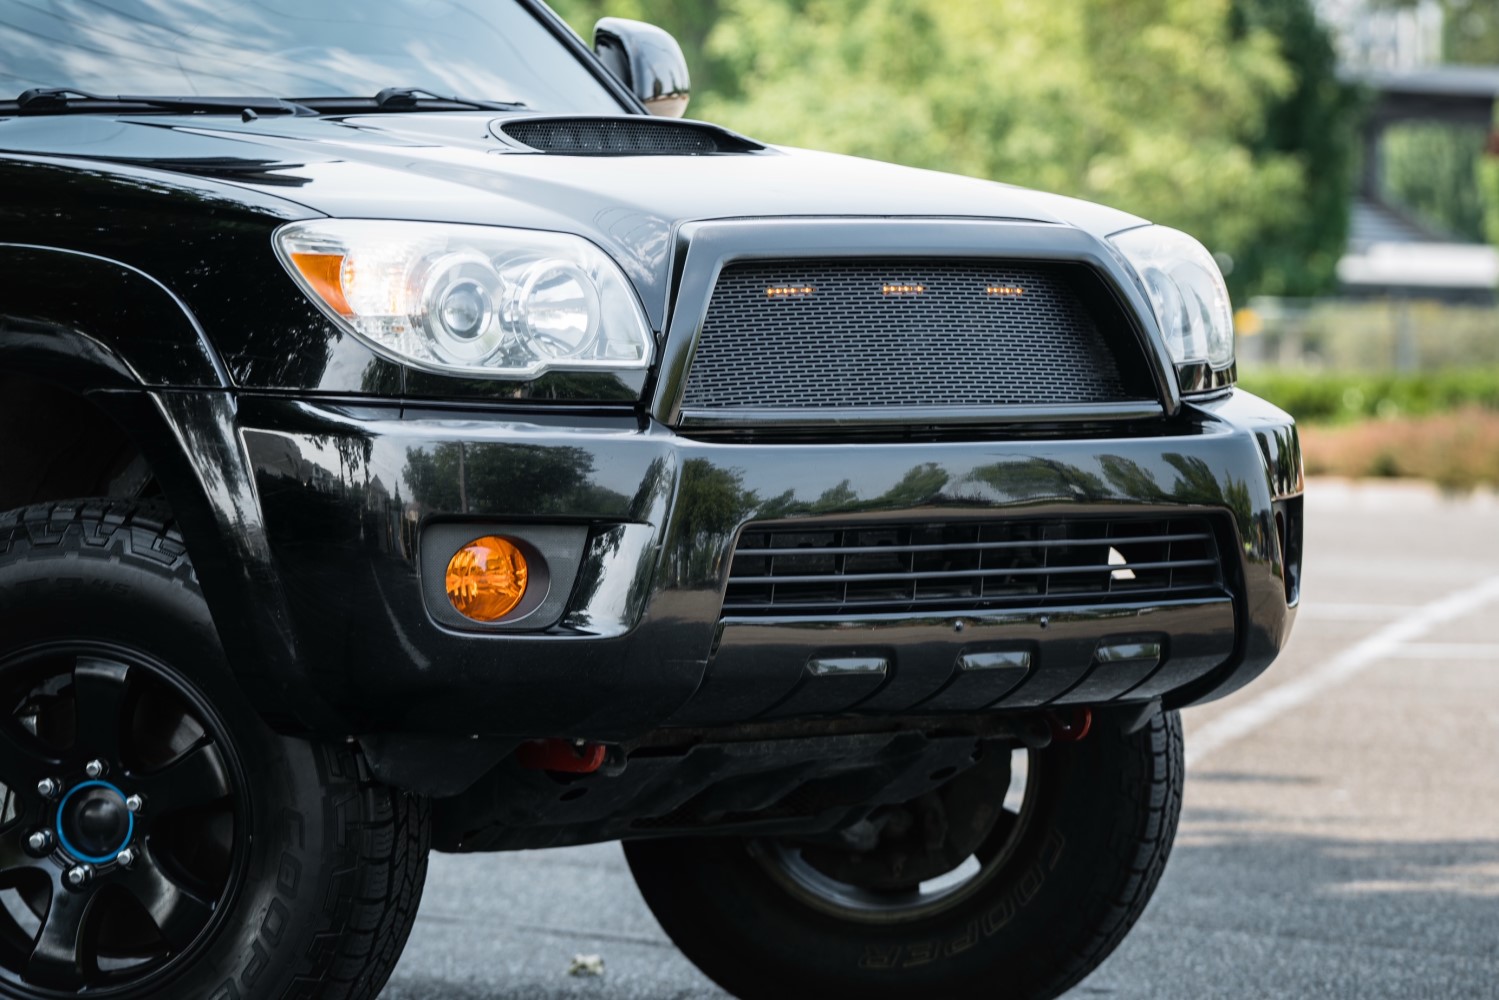 The Ultimate 4Runner Styling Upgrade: Slotted Mesh Grille and Raptor-Style Lights